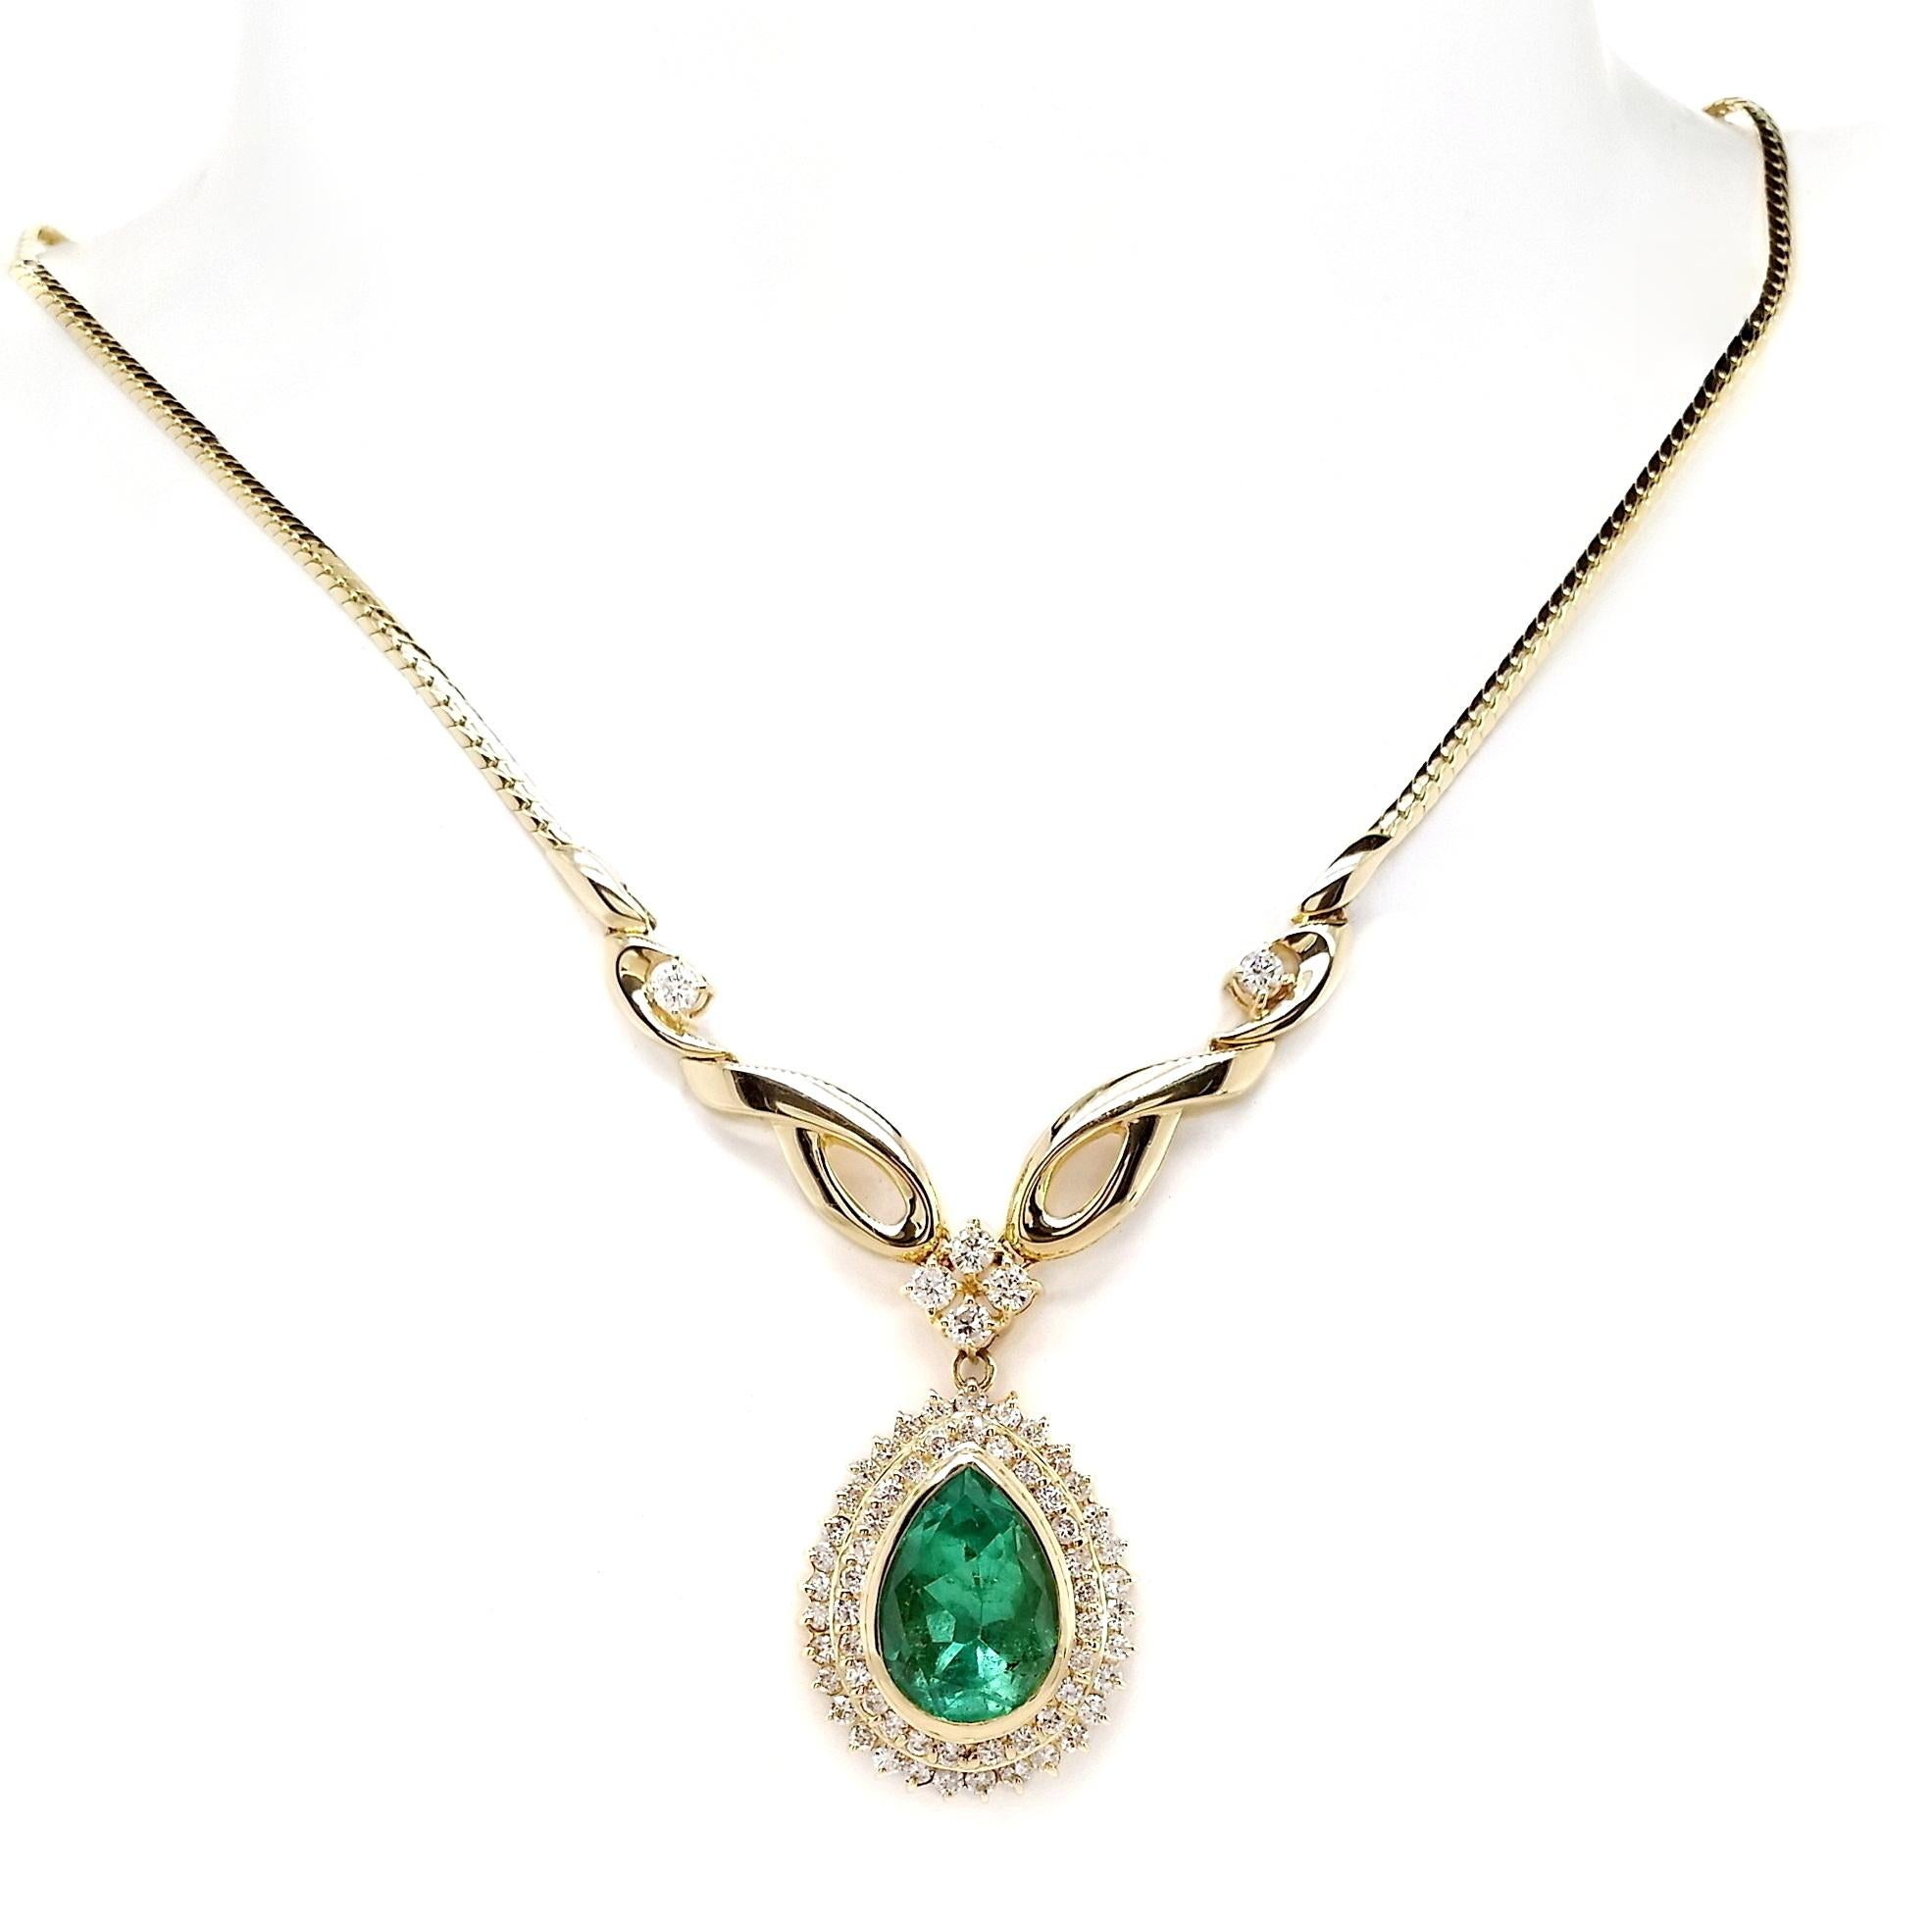 Pear Cut IGI Certified 5.14ct Colombia Emerald 1.46ct Diamonds 18K Yellow Gold Necklace For Sale